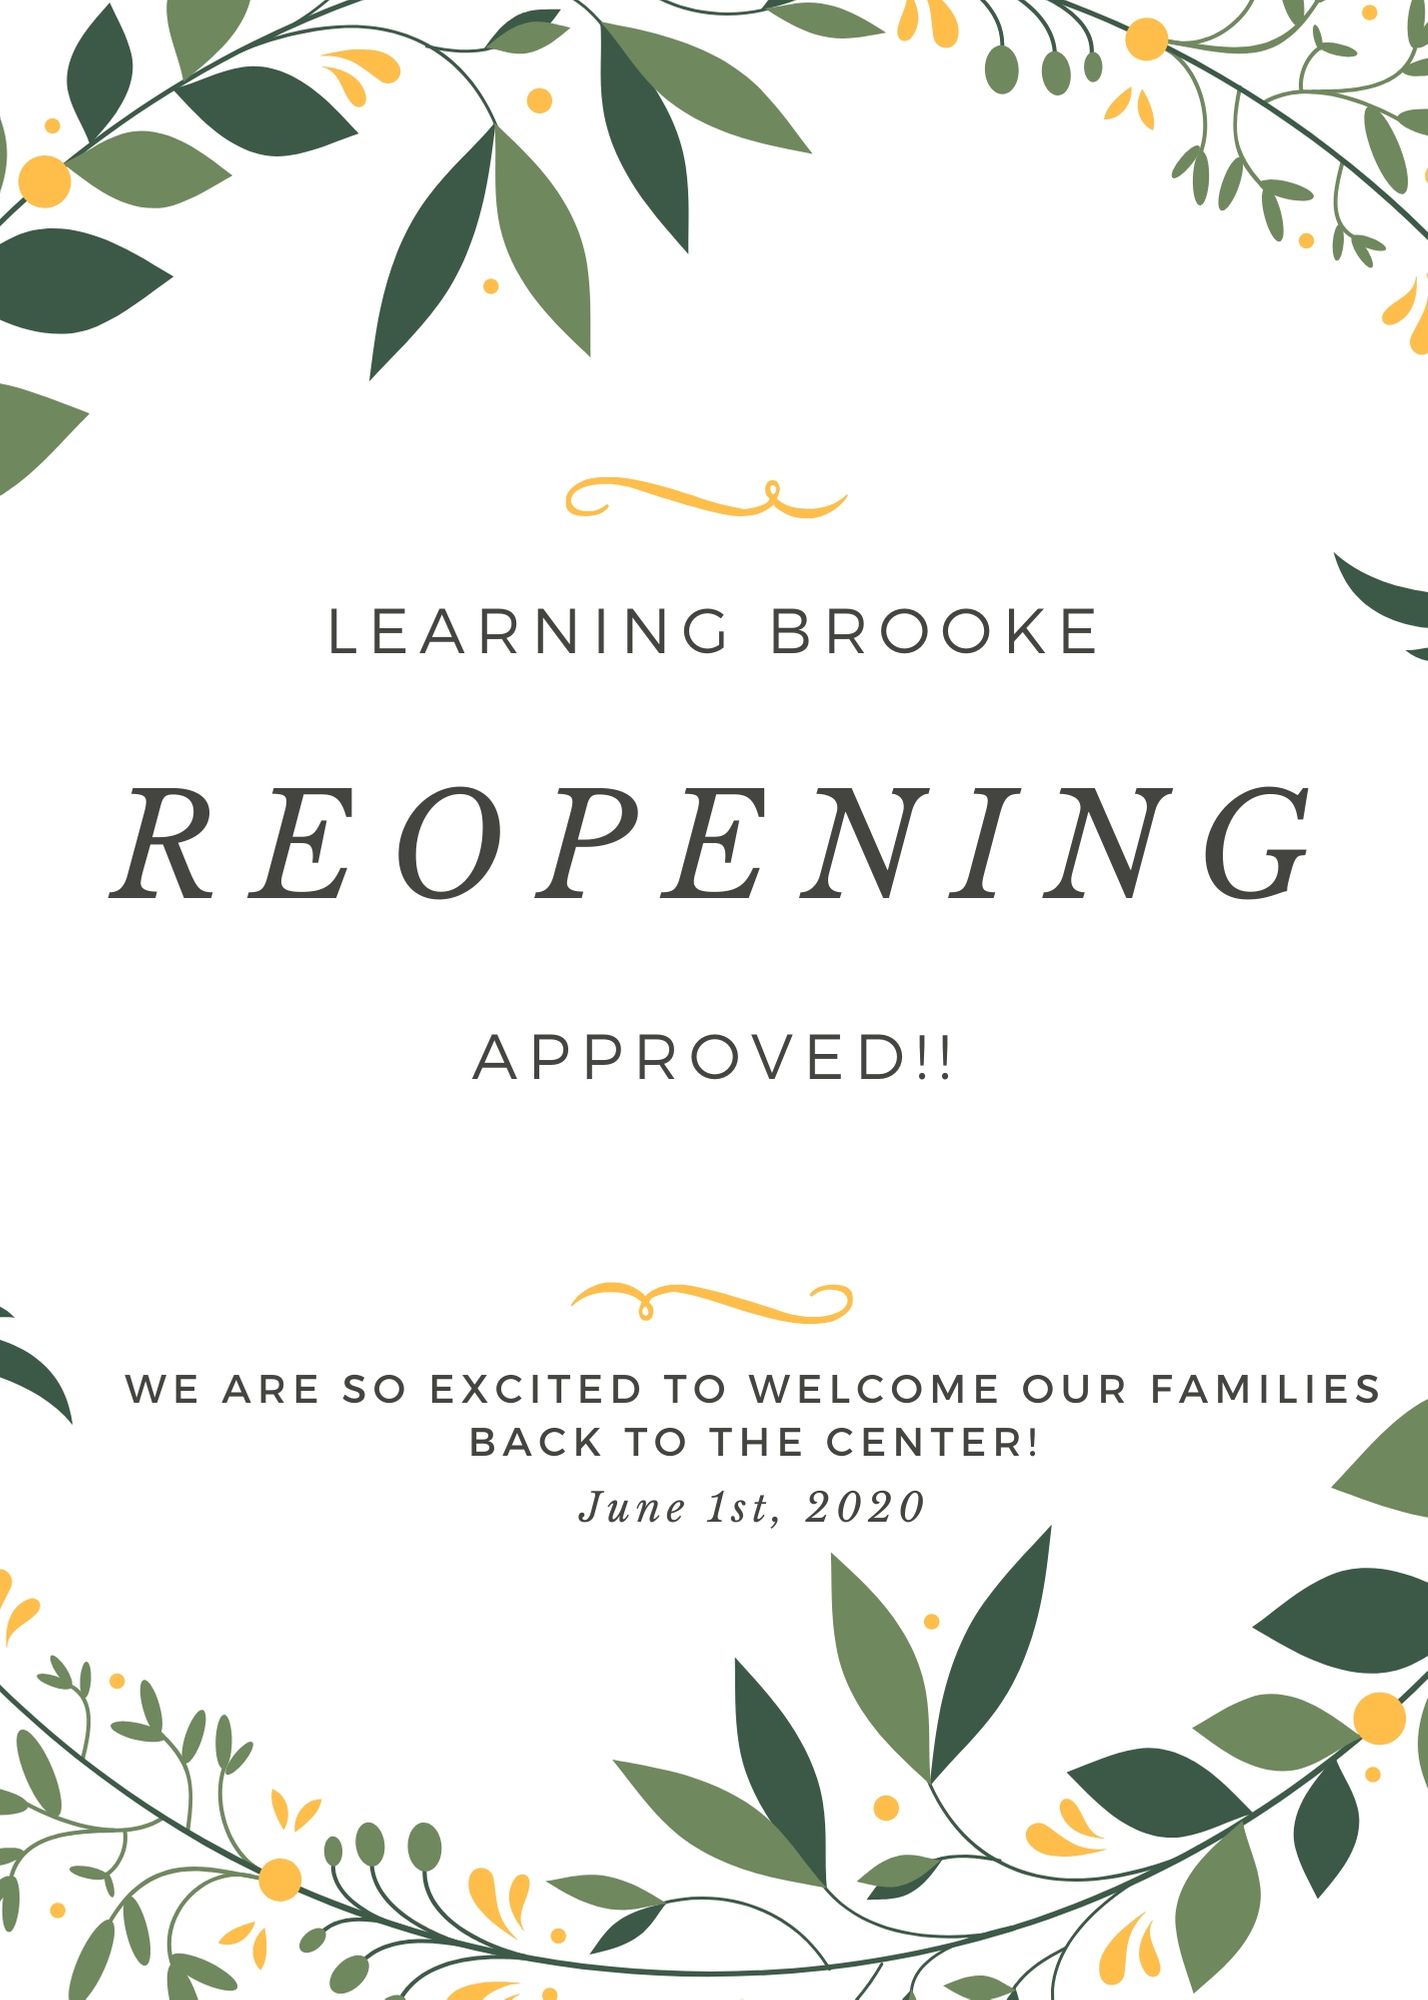 Learning Brooke Reopening June 1st!